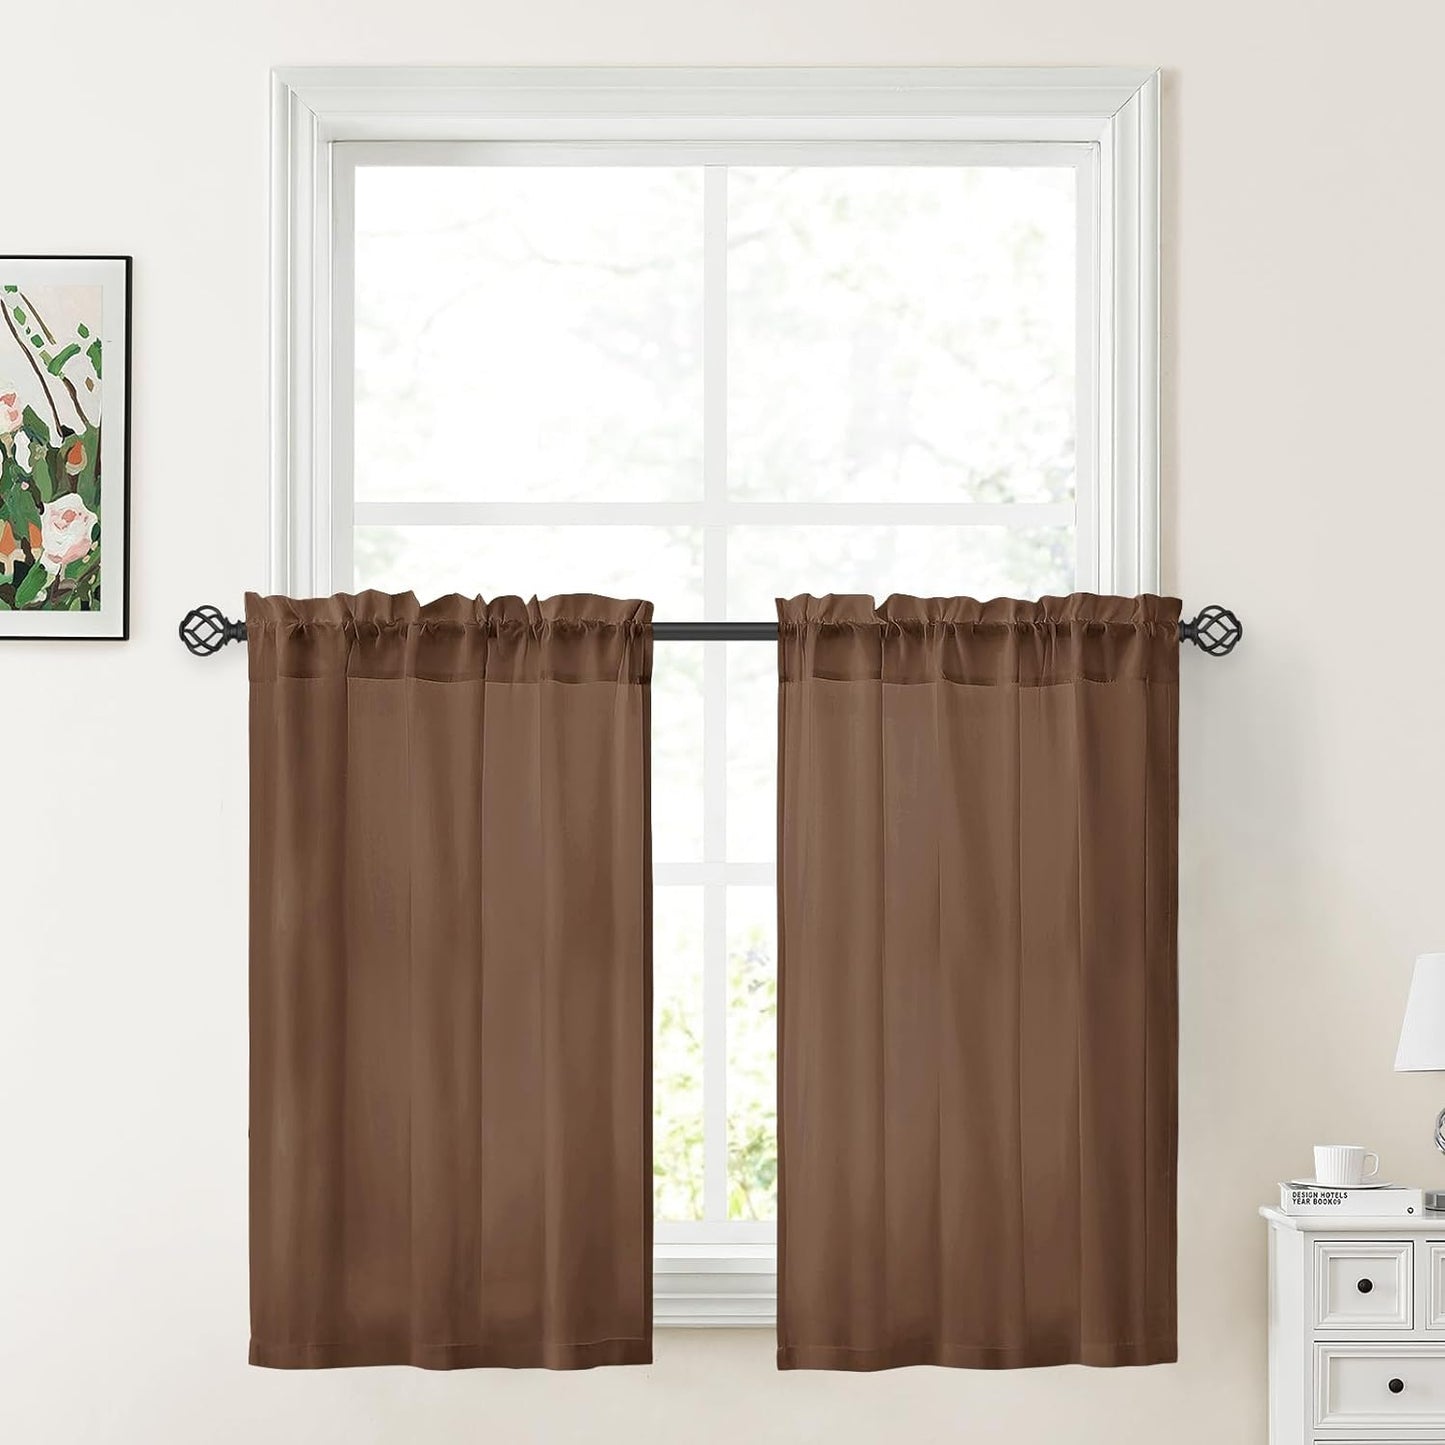 HOMEIDEAS Non-See-Through White Privacy Sheer Curtains 52 X 84 Inches Long 2 Panels Semi Sheer Curtains Light Filtering Window Curtains Drapes for Bedroom Living Room  HOMEIDEAS Brown W30" X L36" 